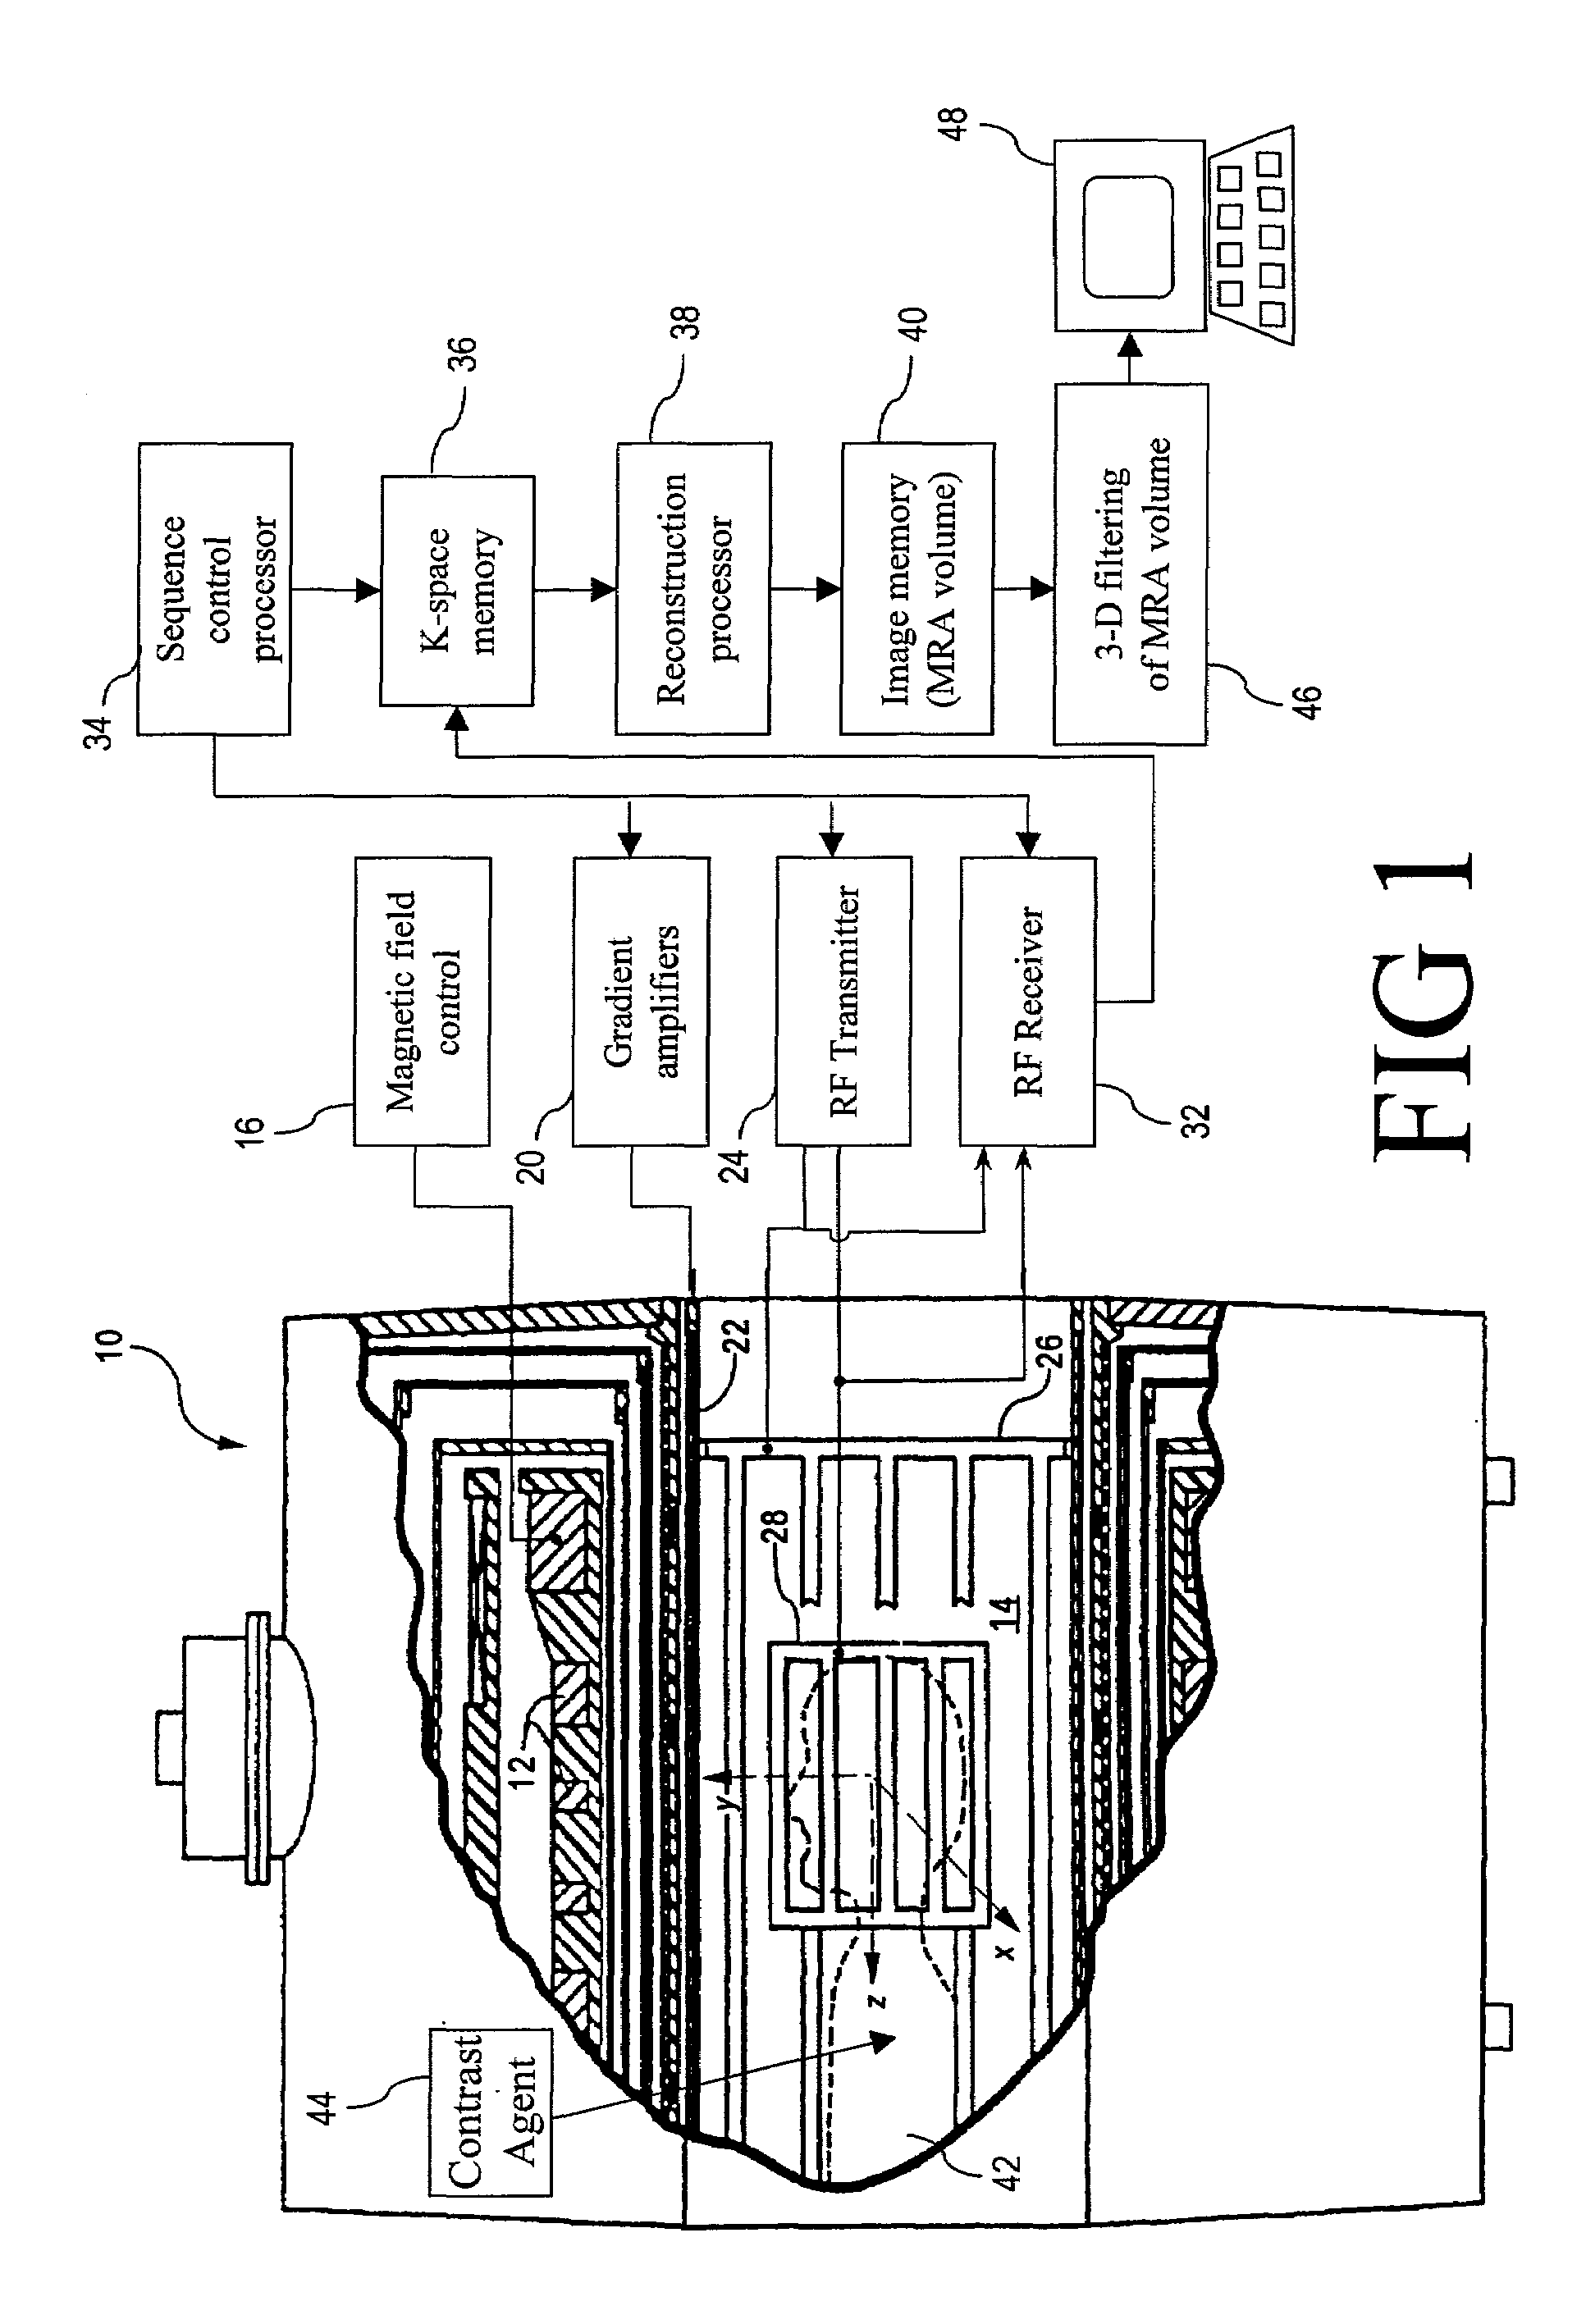 Method and apparatus for three-dimensional filtering of angiographic volume data